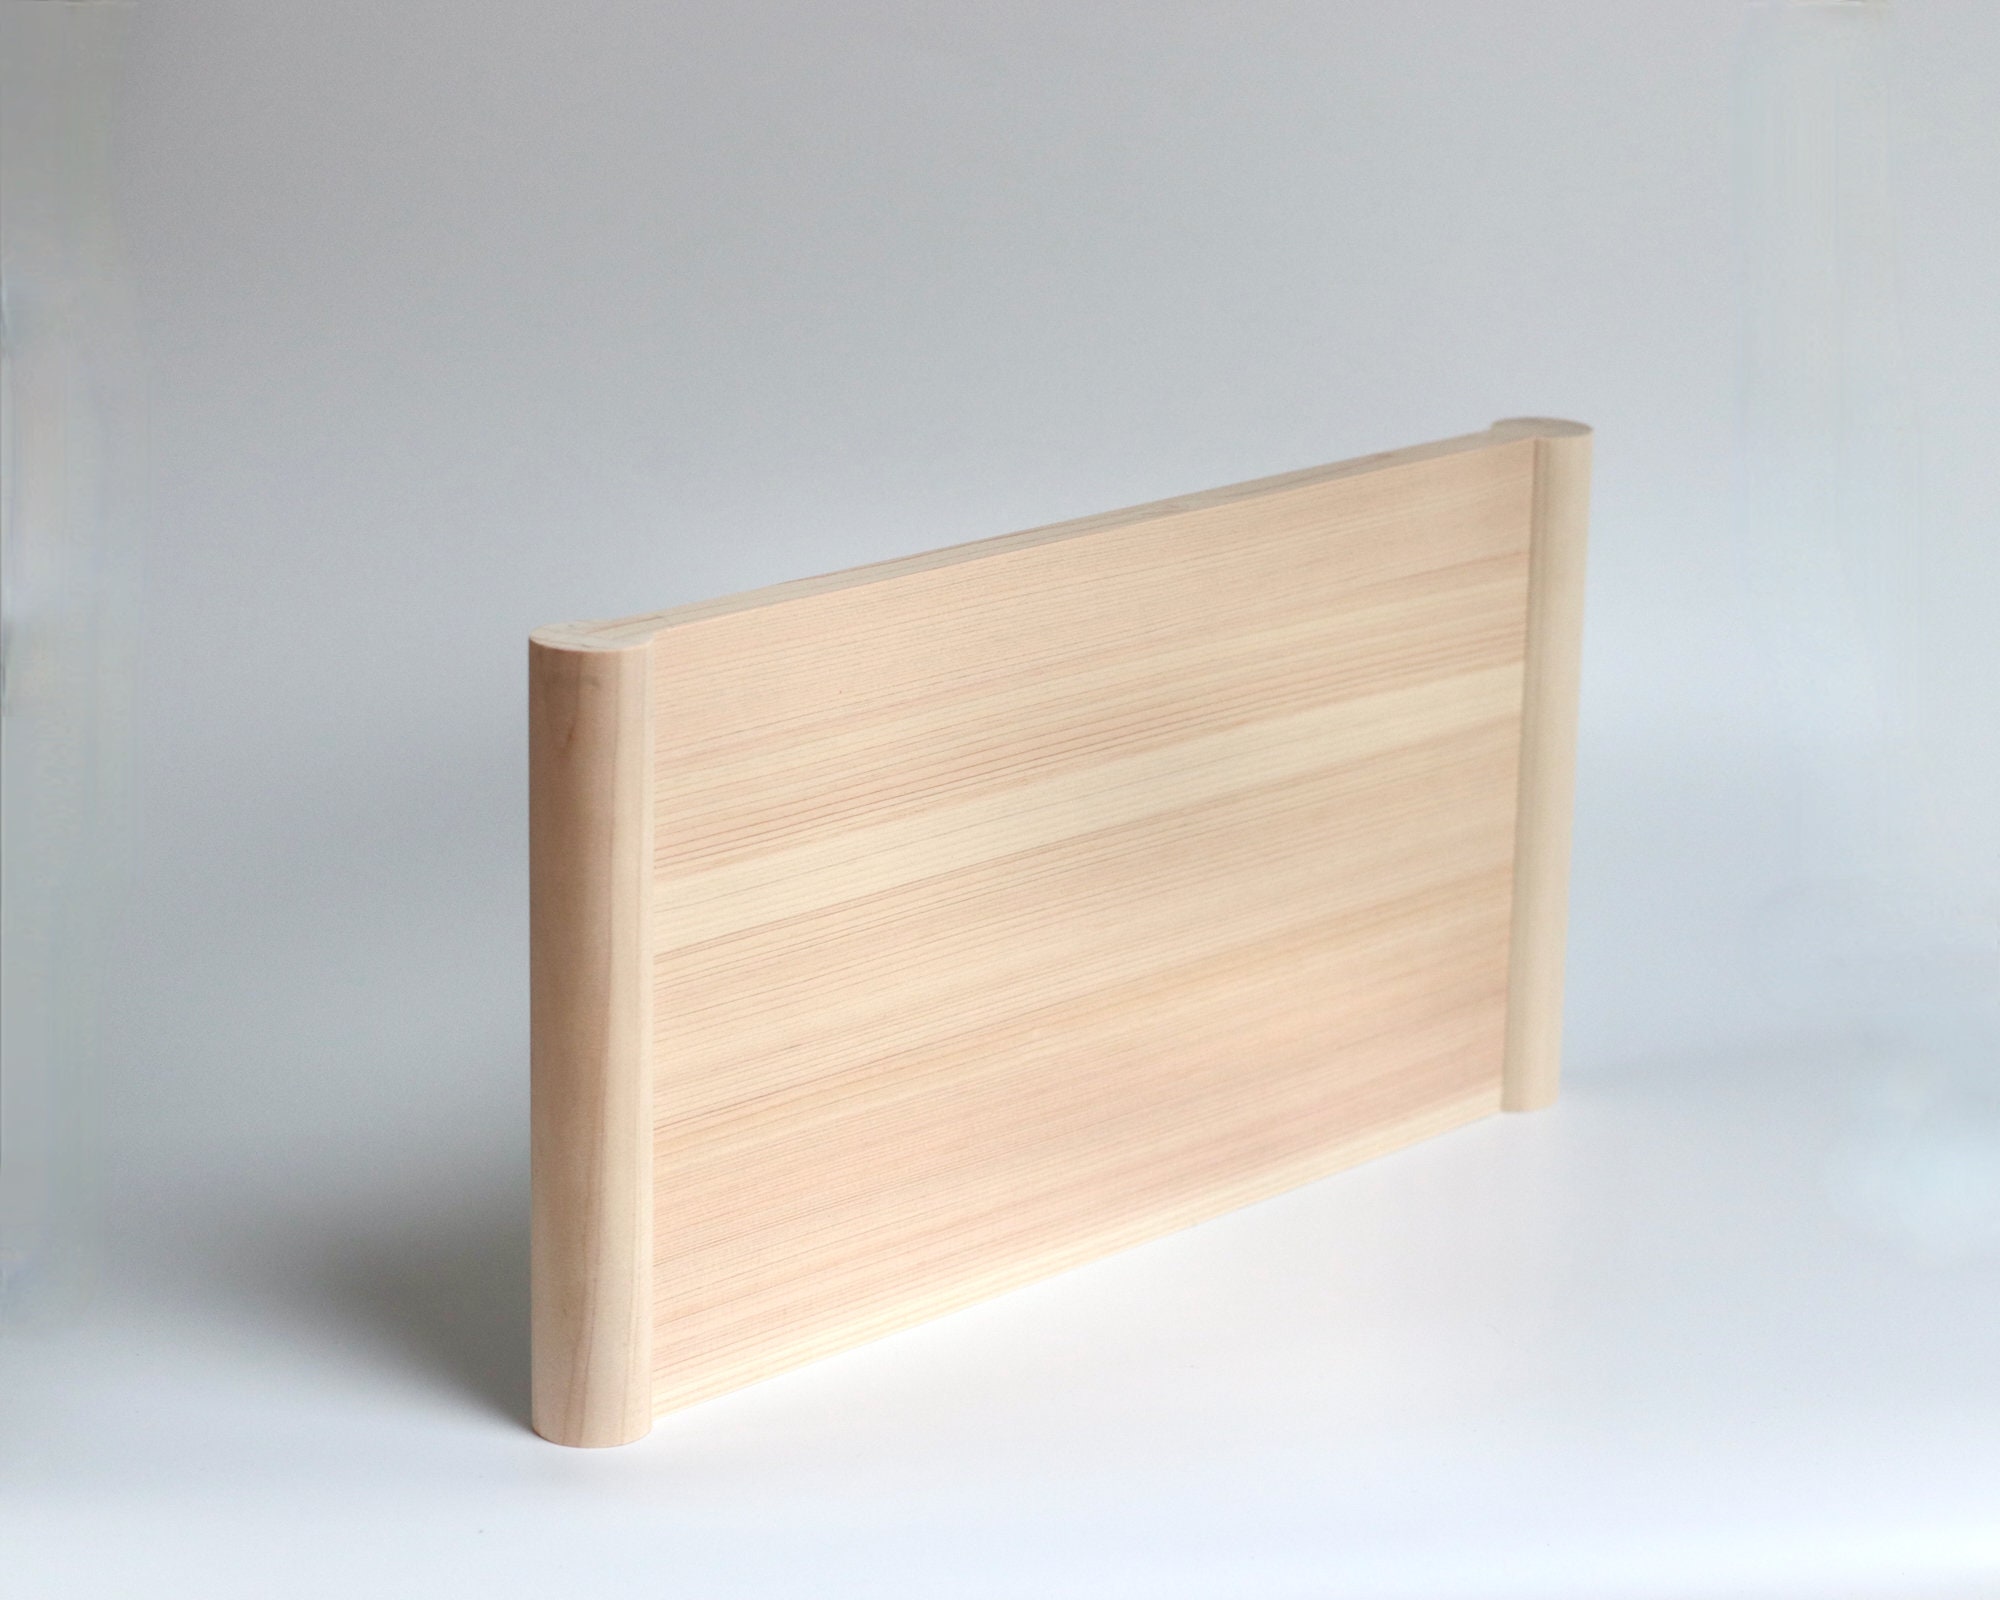 Japanese Wooden Cutting Board, Lightweight Chopping Board for Kitchen, Made  of Tohi, Made in Japan, 17.7 x 10.2 x 0.6 inch